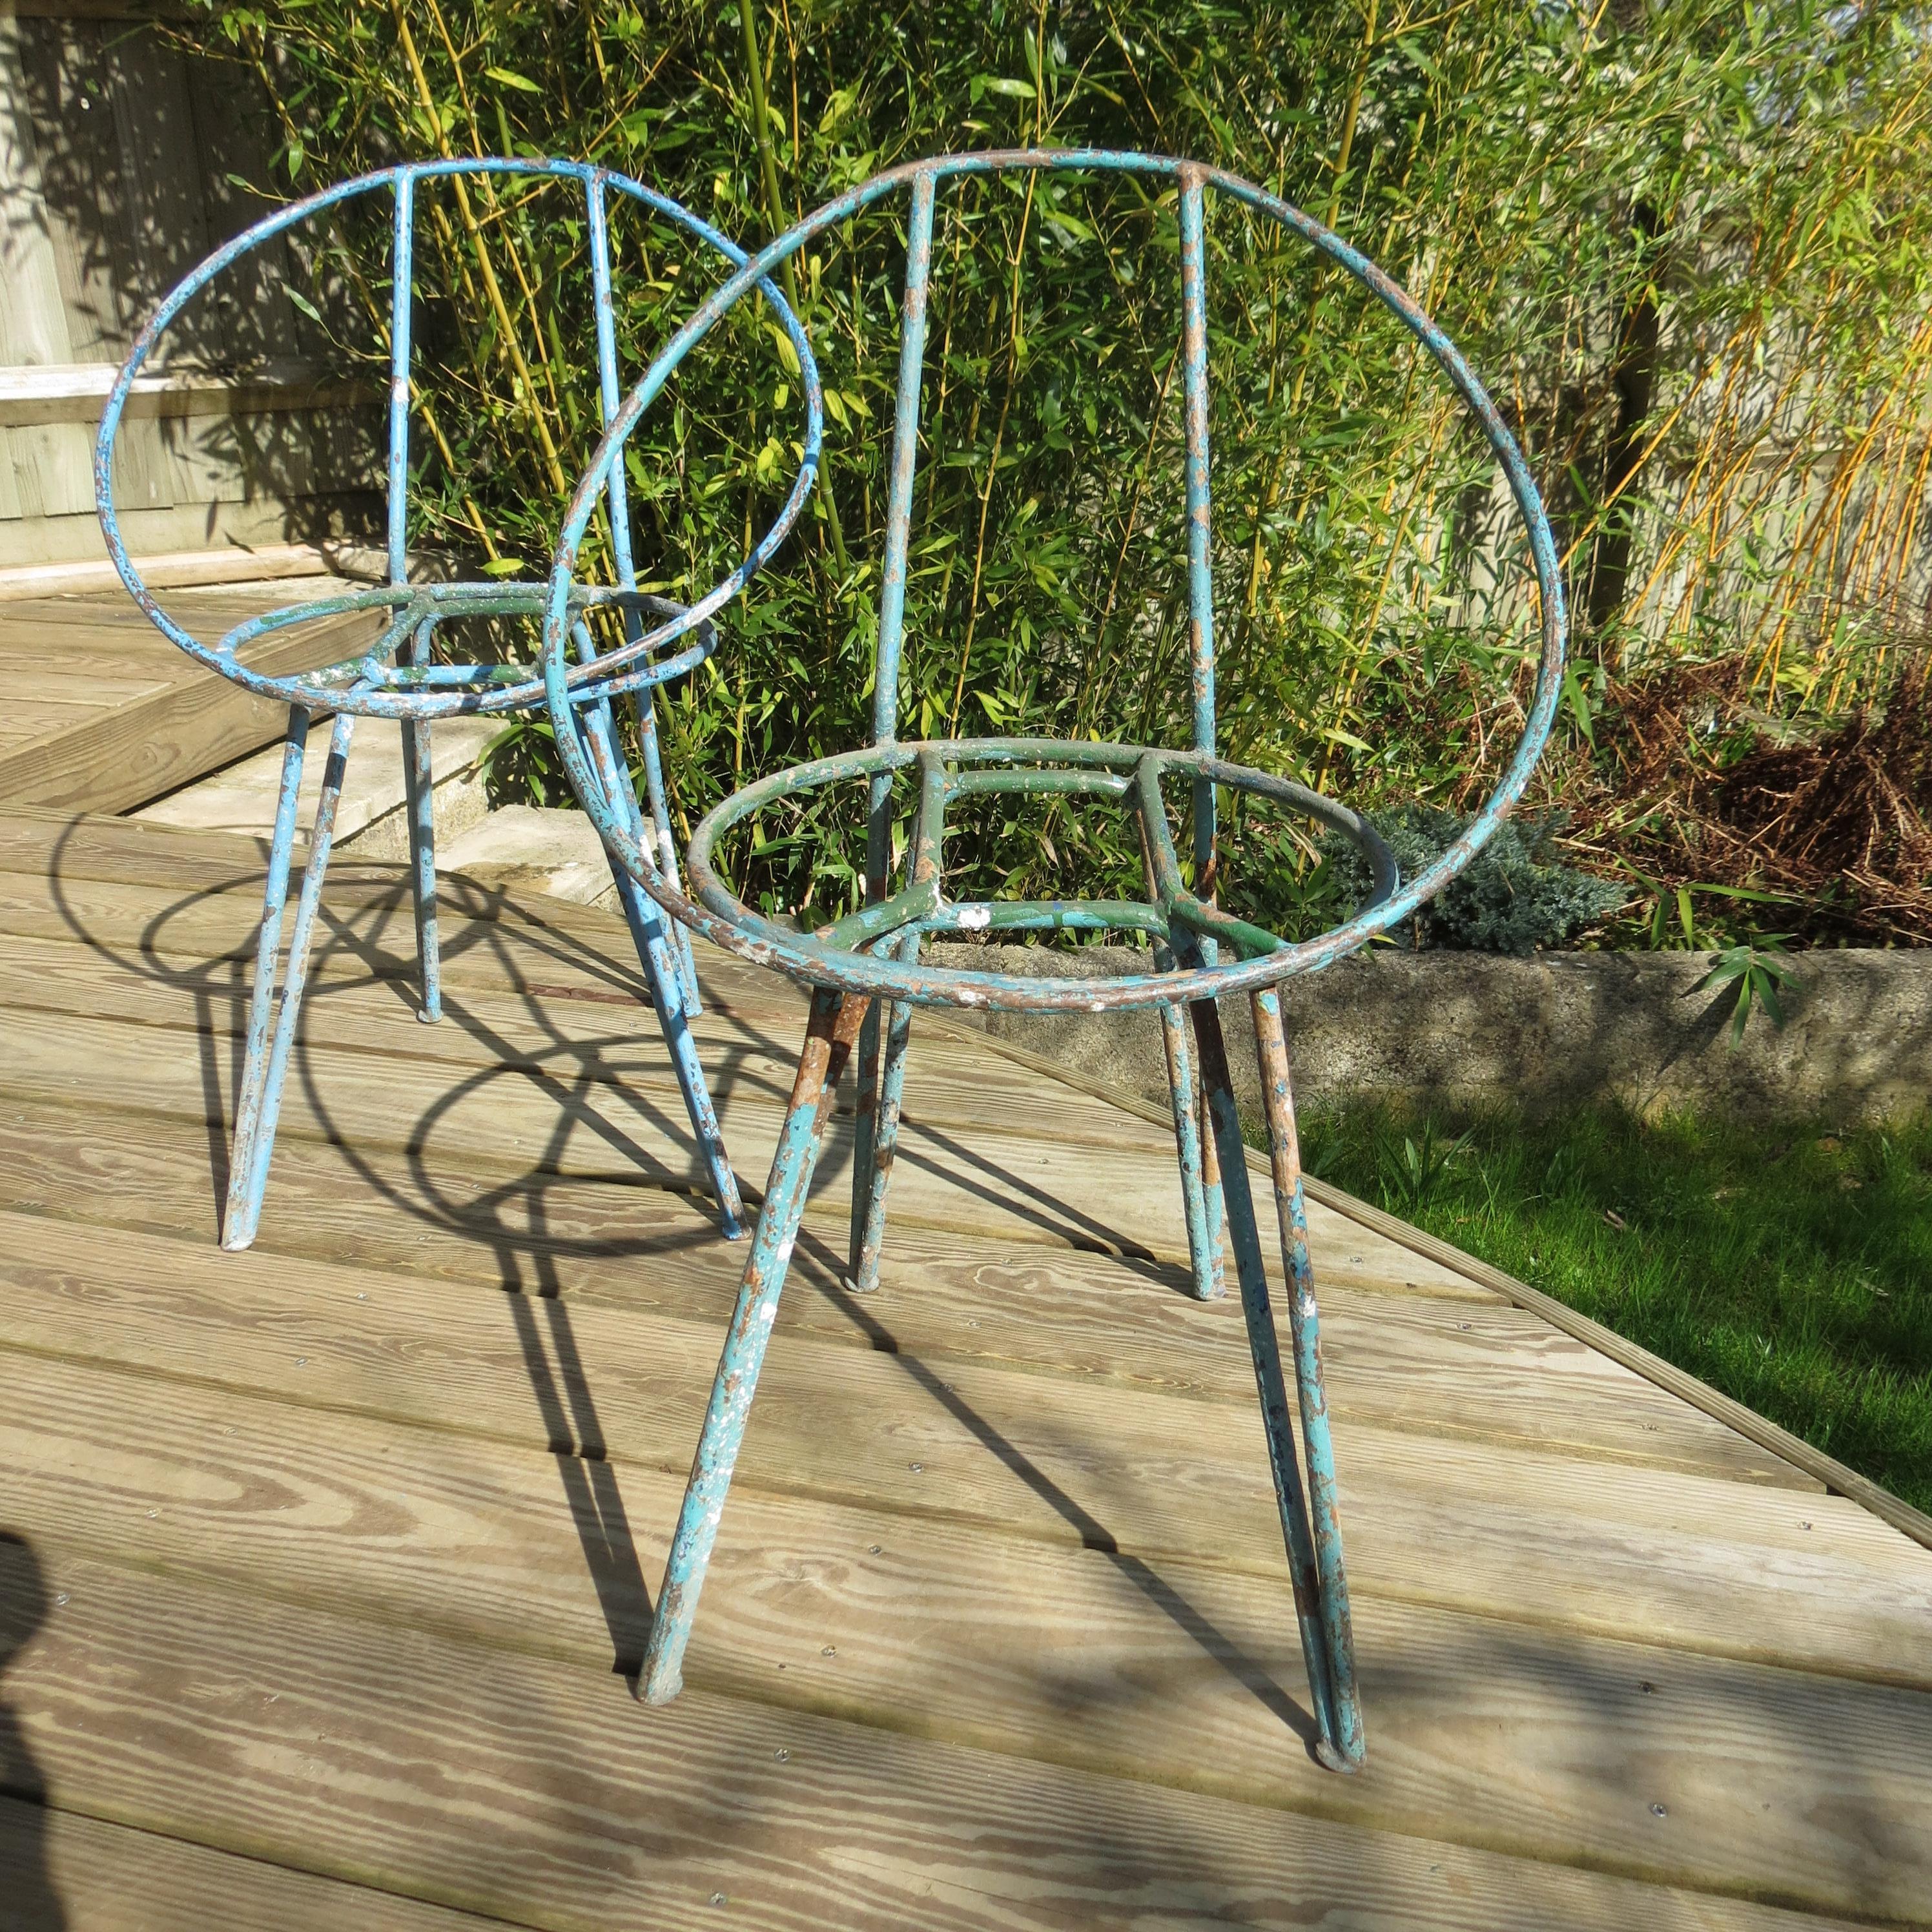 20th Century Set of 4 Midcentury Blue Patinated Metal Garden Chairs from the 1950s